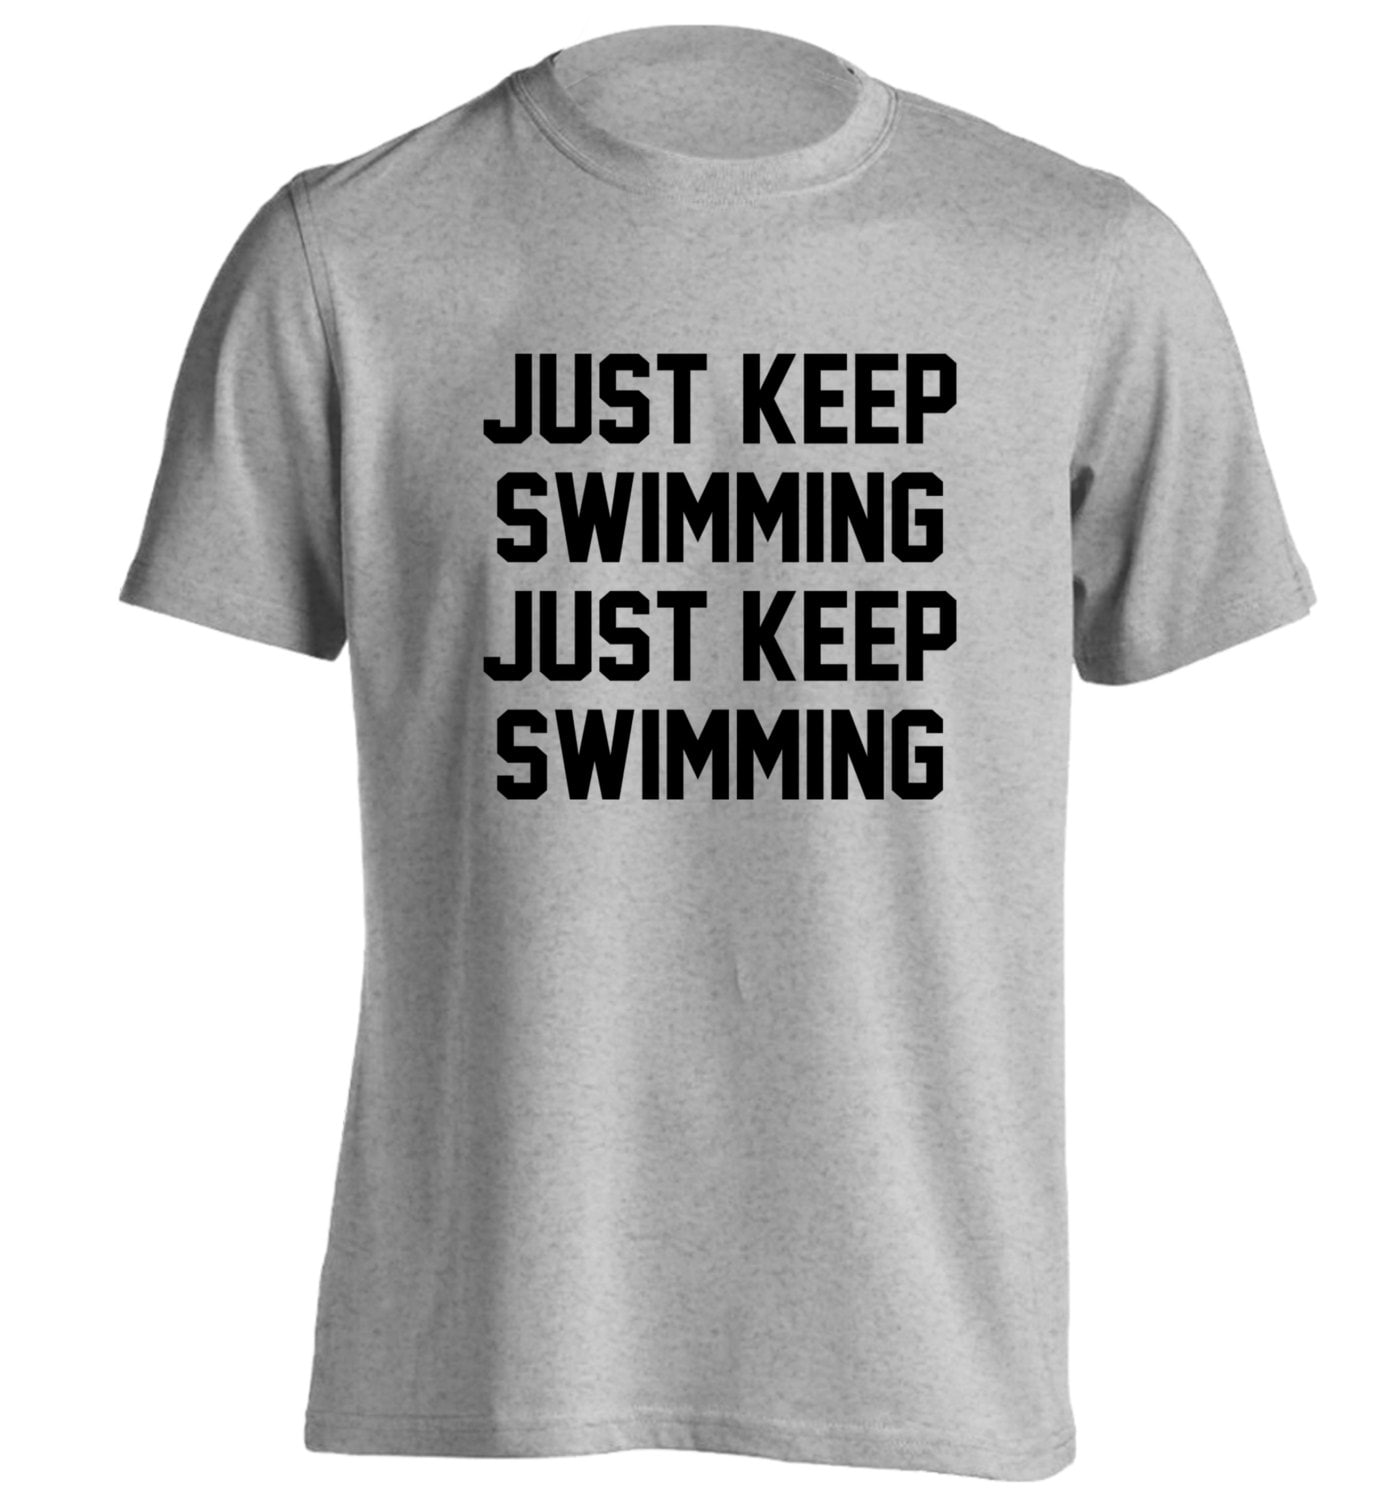 Just keep swimming Tshirt funny slogan quote pun by FloxCreative